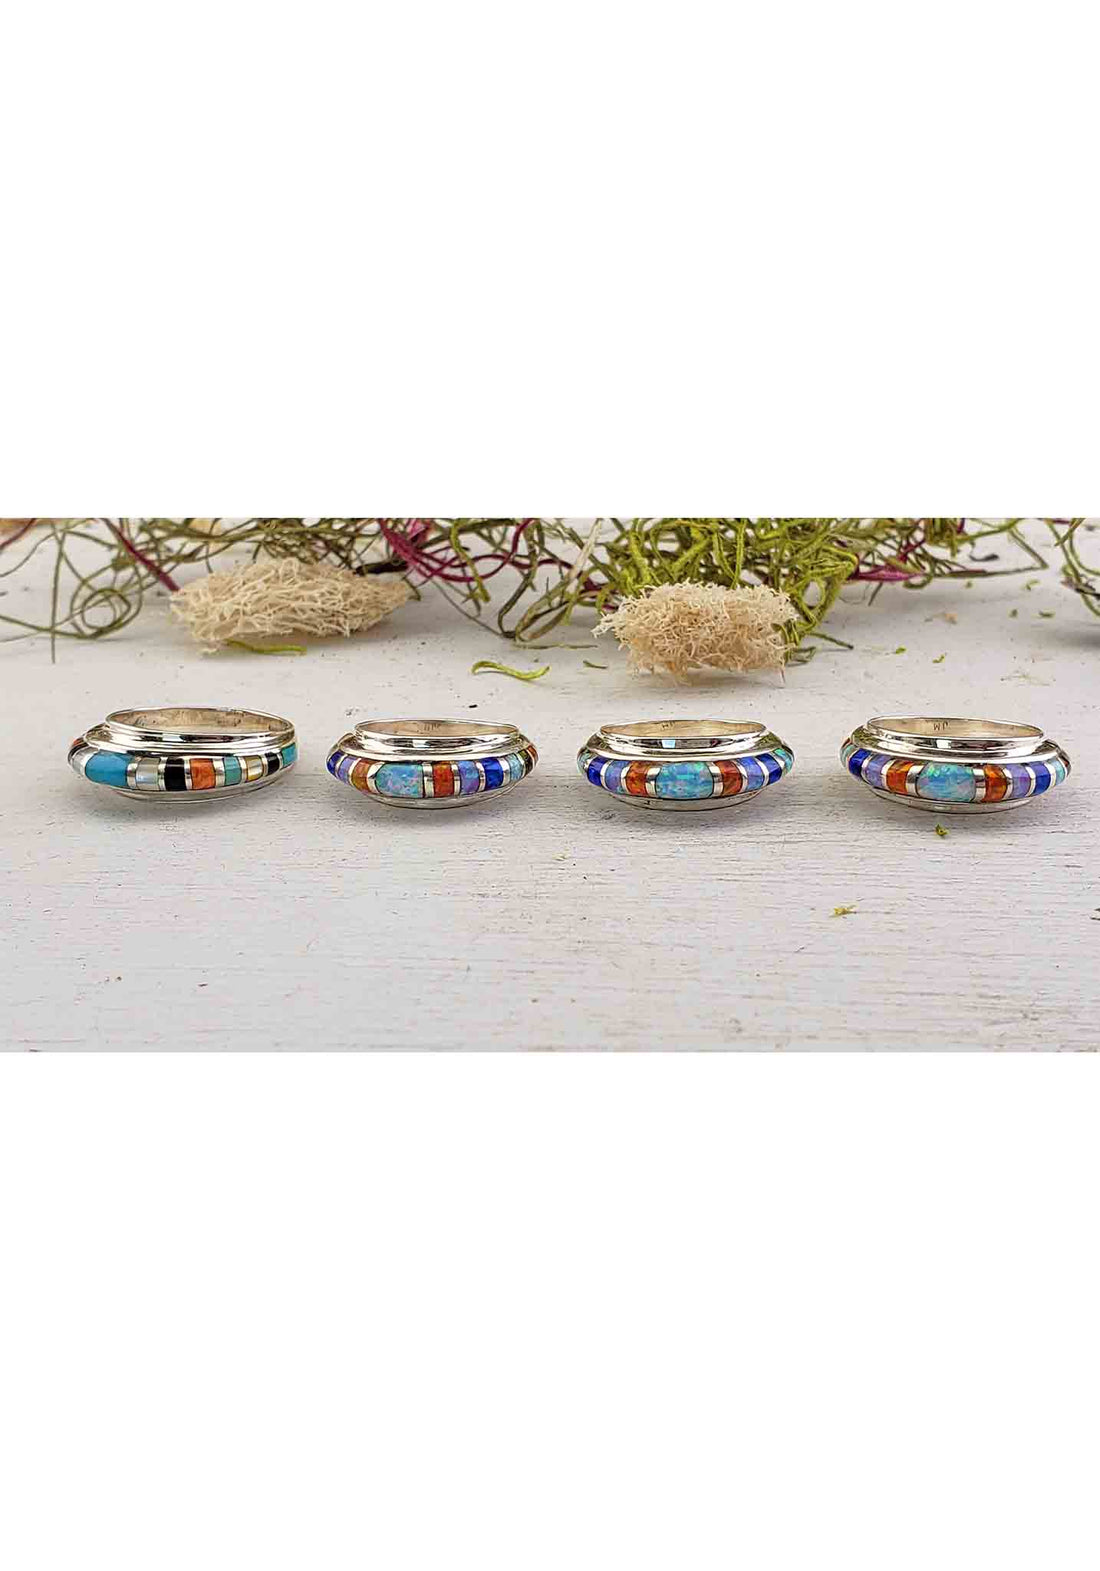 Gemstone Inlay Sterling Silver Band with Opal, Turquoise, Mother of Pearl, Coral, Onyx 2